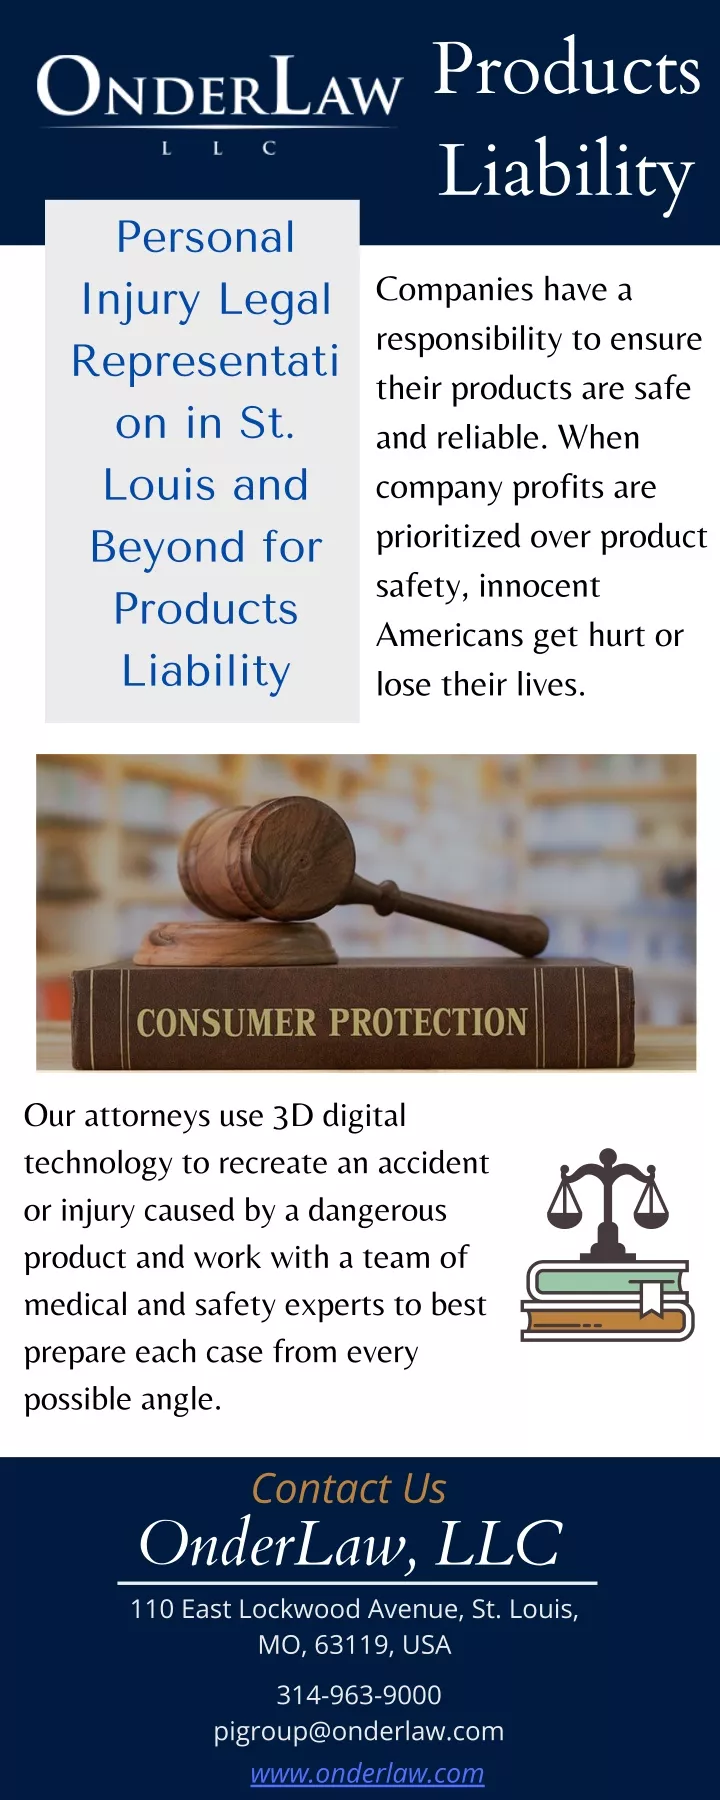 products liability